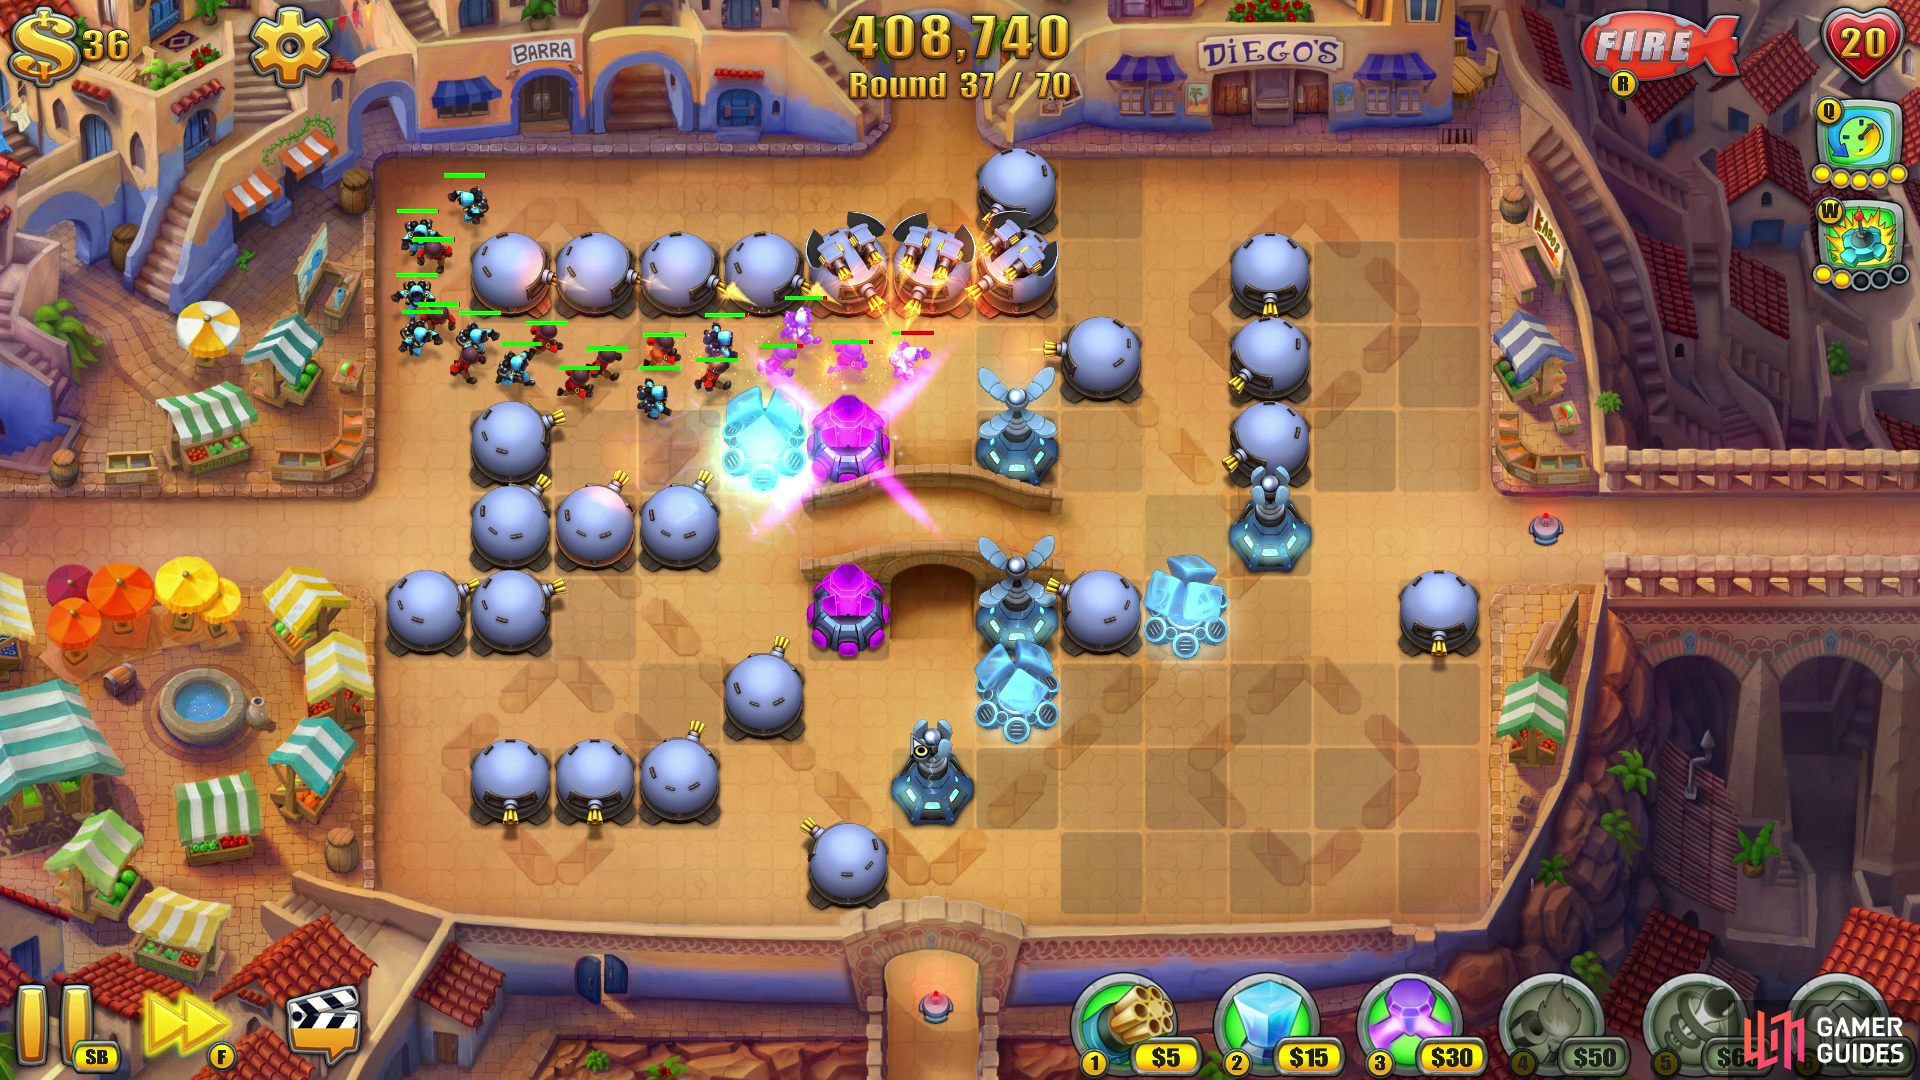 Fieldrunners 2 for Android review: Bigger and better tower defense than the  original - CNET